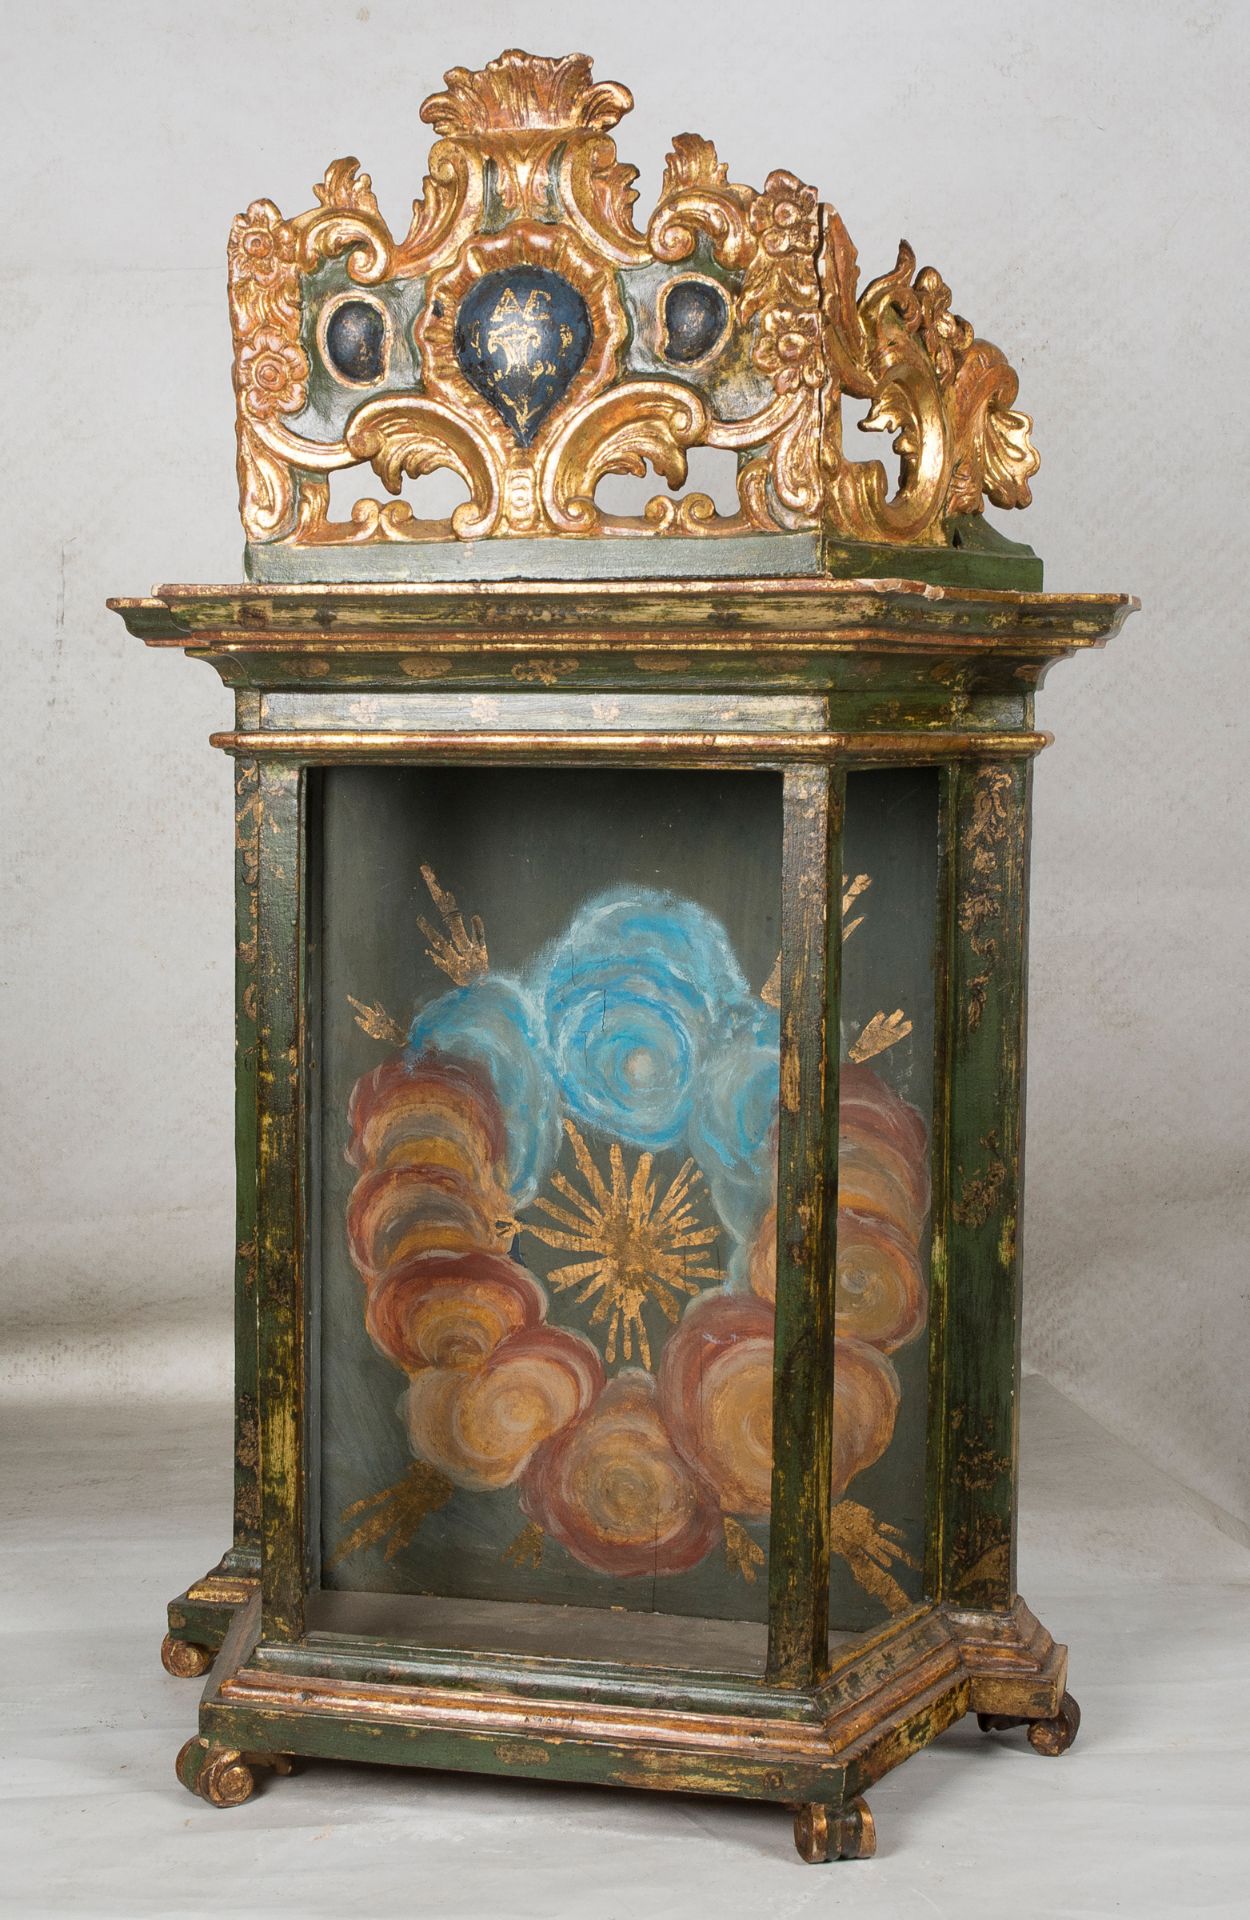 Pair of carved, polychromed and gilded wooden niches. Baroque. Late 17th century. 88 x 55 x 23 cm. - Bild 4 aus 6